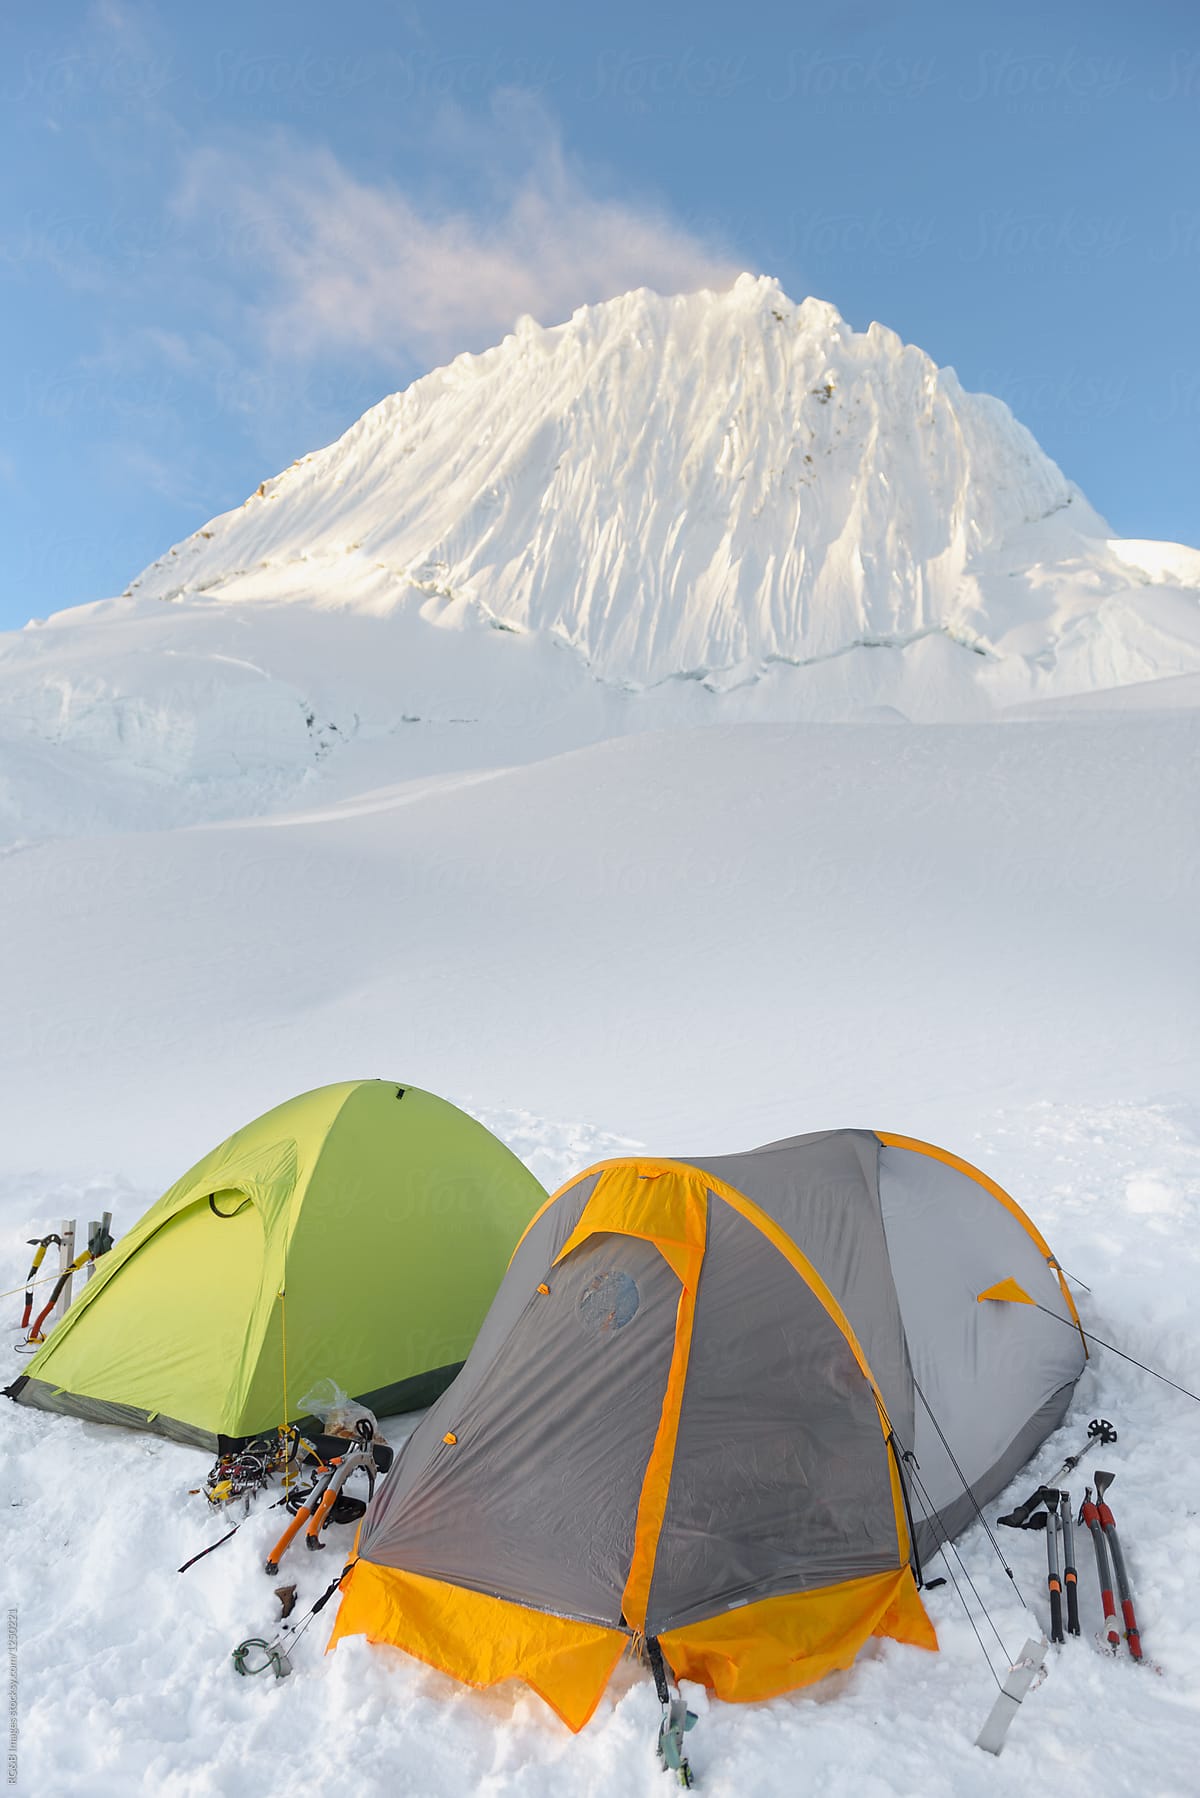 Tents settled on mountain plateau covered by powdery snow